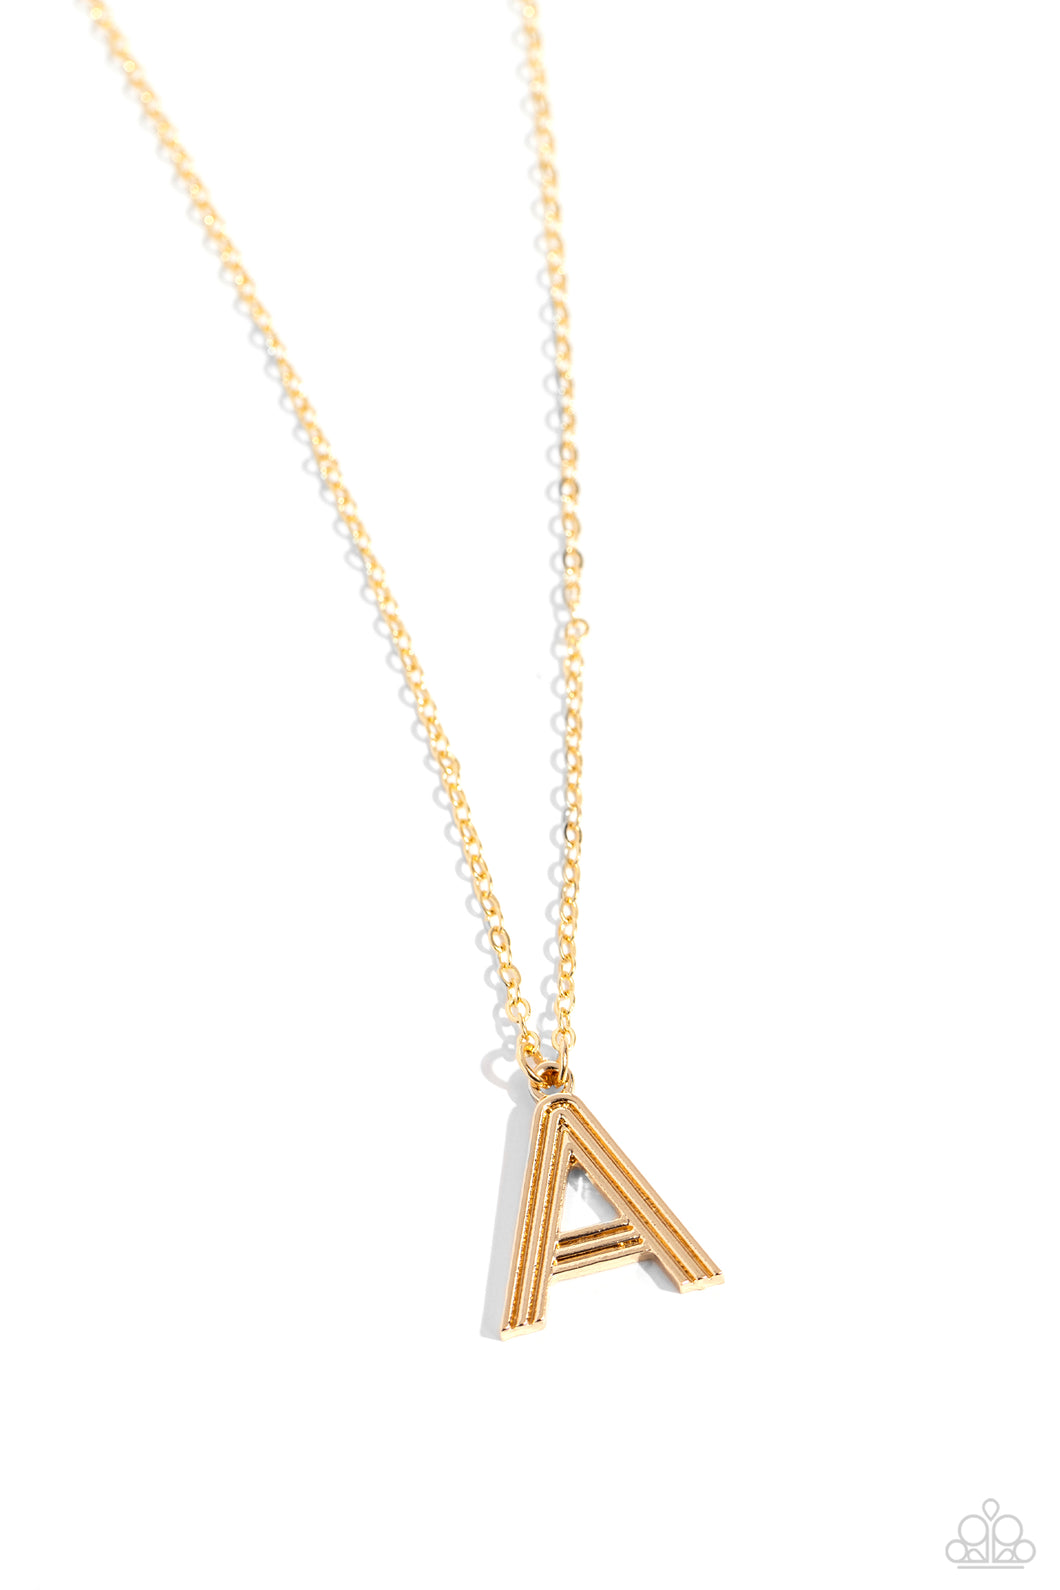 Leave Your Initials - Gold - (R-N-L-M-A-T) Necklace